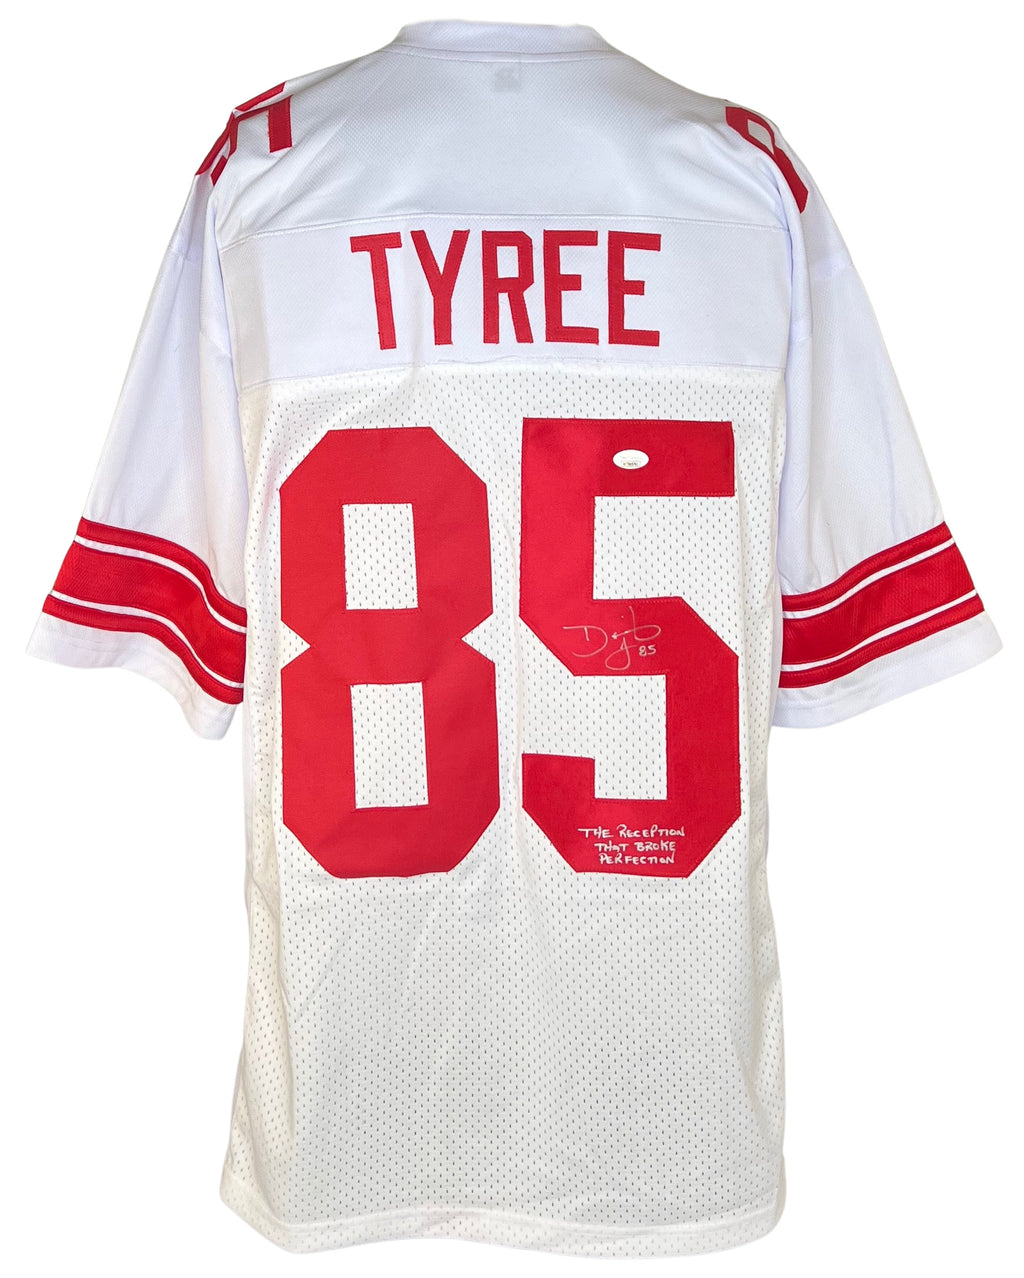 DAVID TYREE AUTOGRAPHED SIGNED INSCRIBED WHITE PRO STYLE JERSEY JSA COA